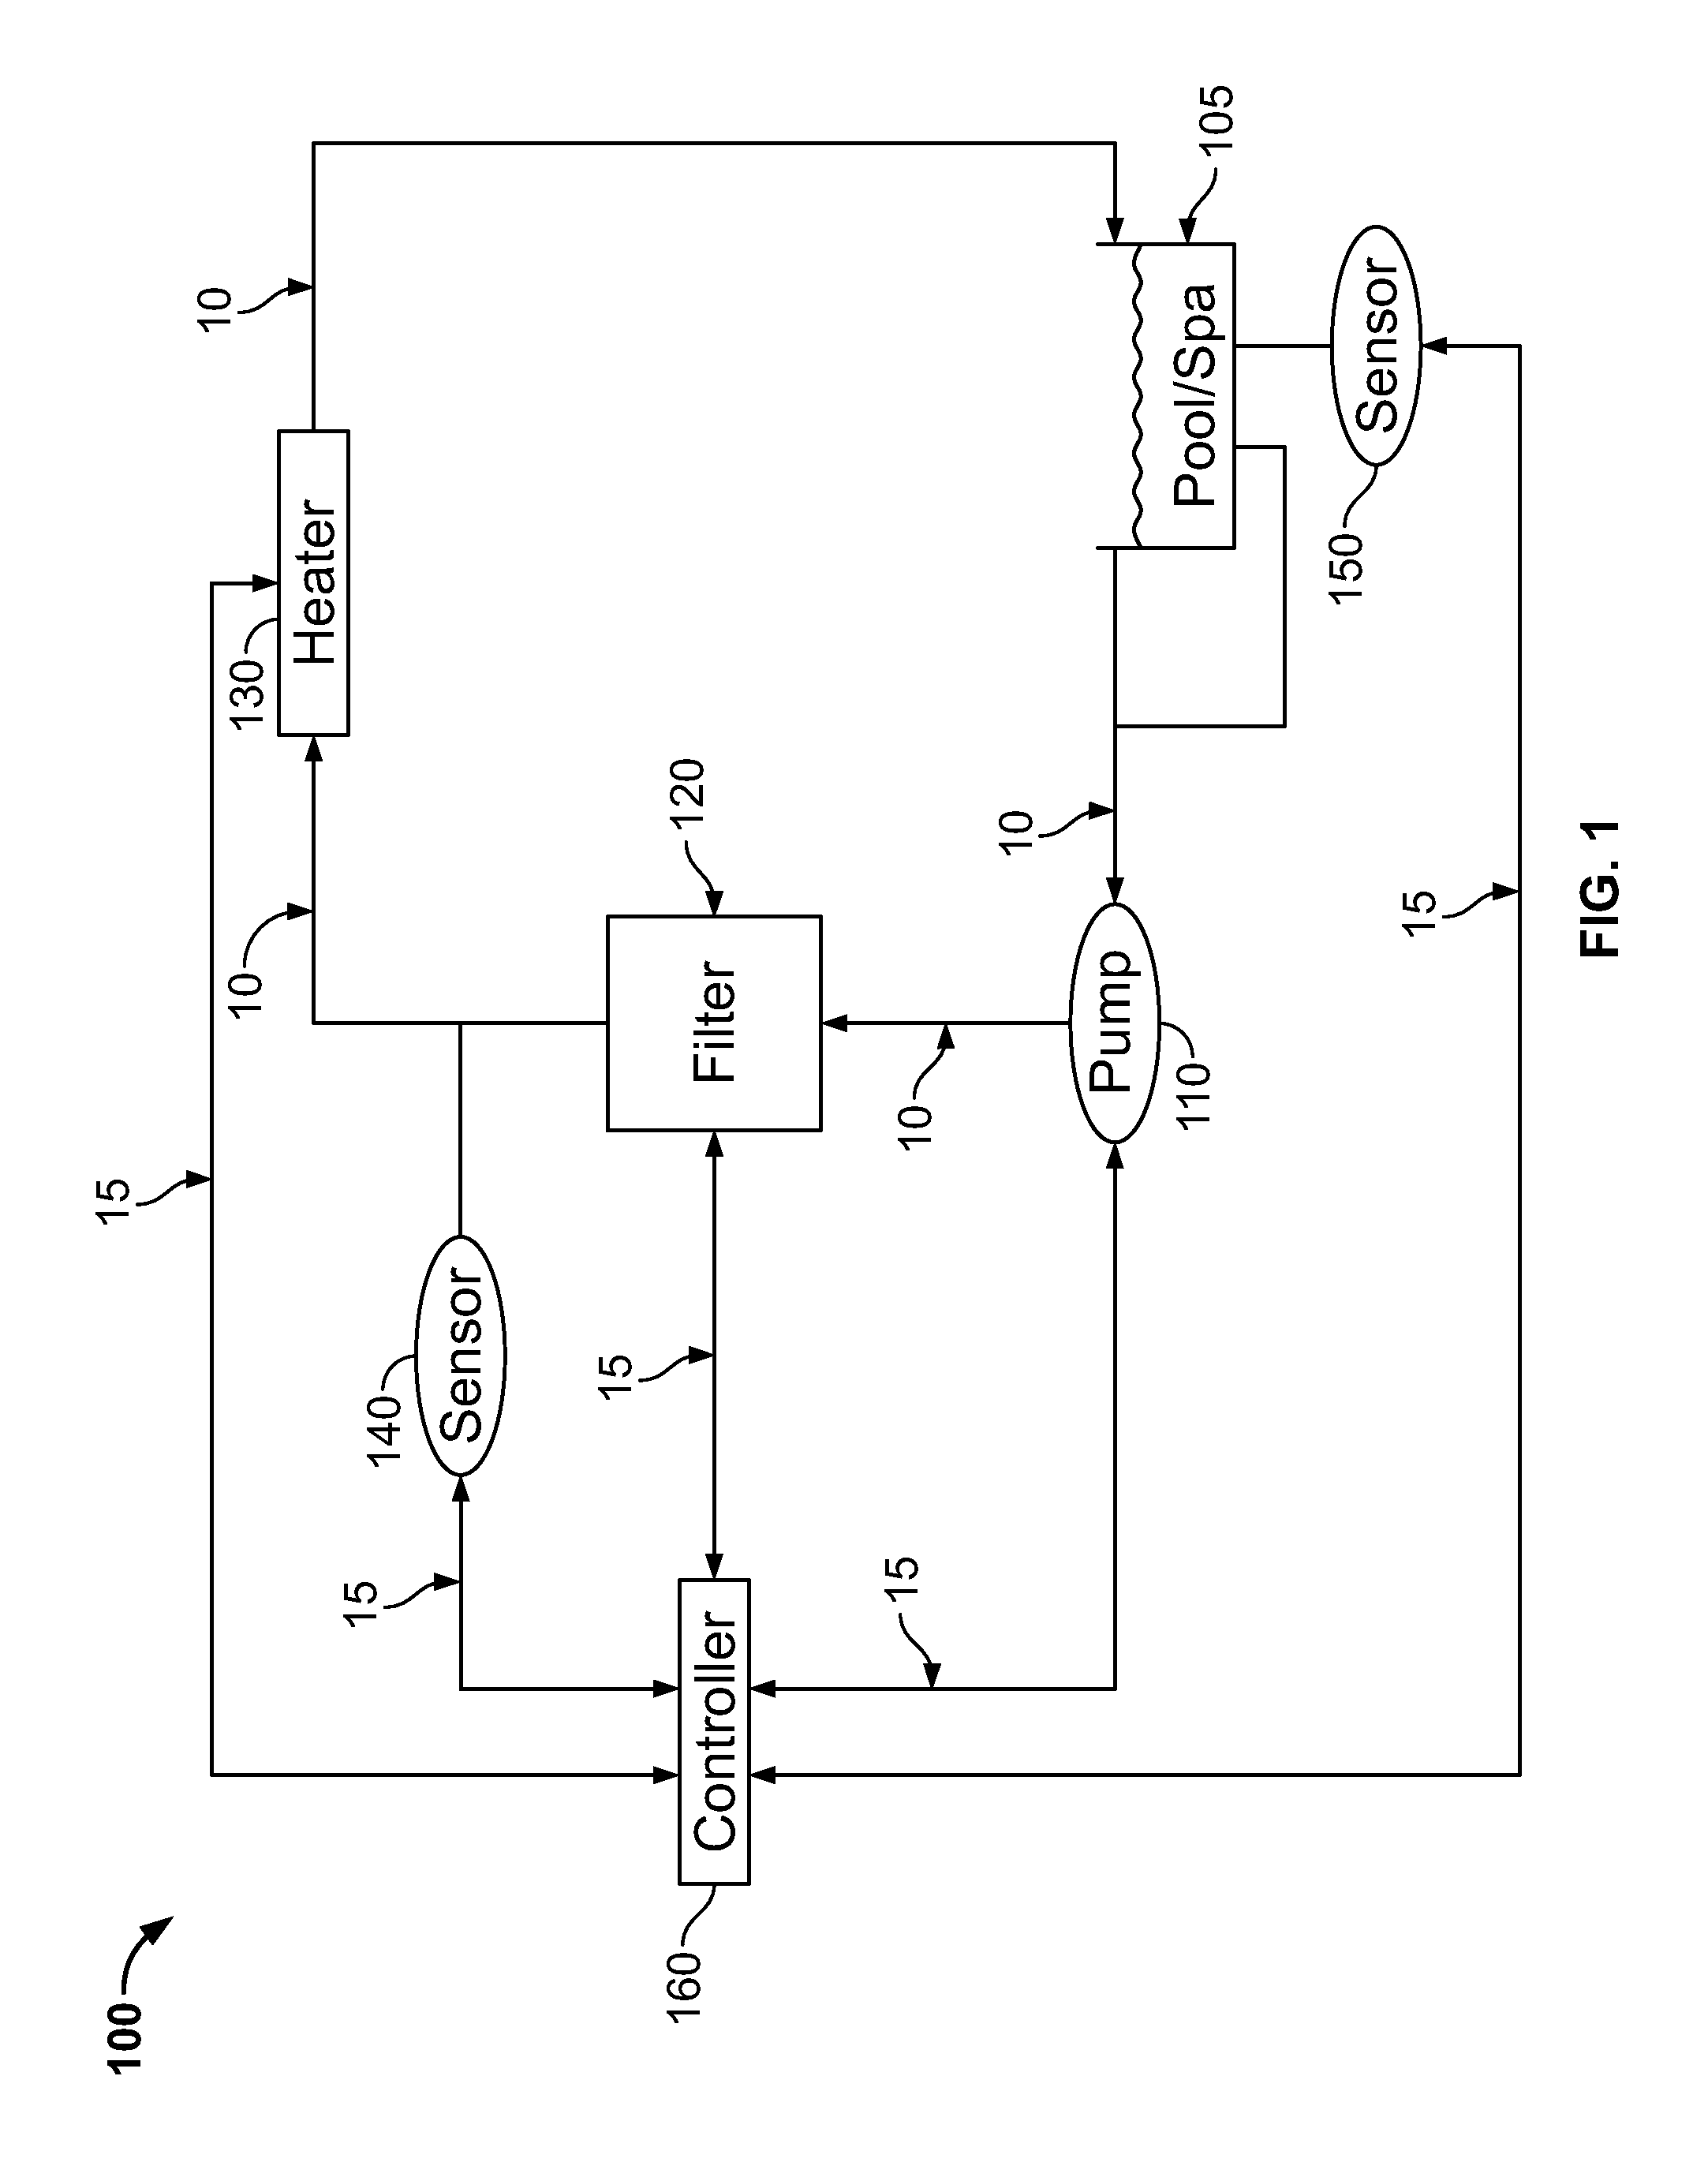 System And Method For Dynamic Device Discovery And Address Assignment